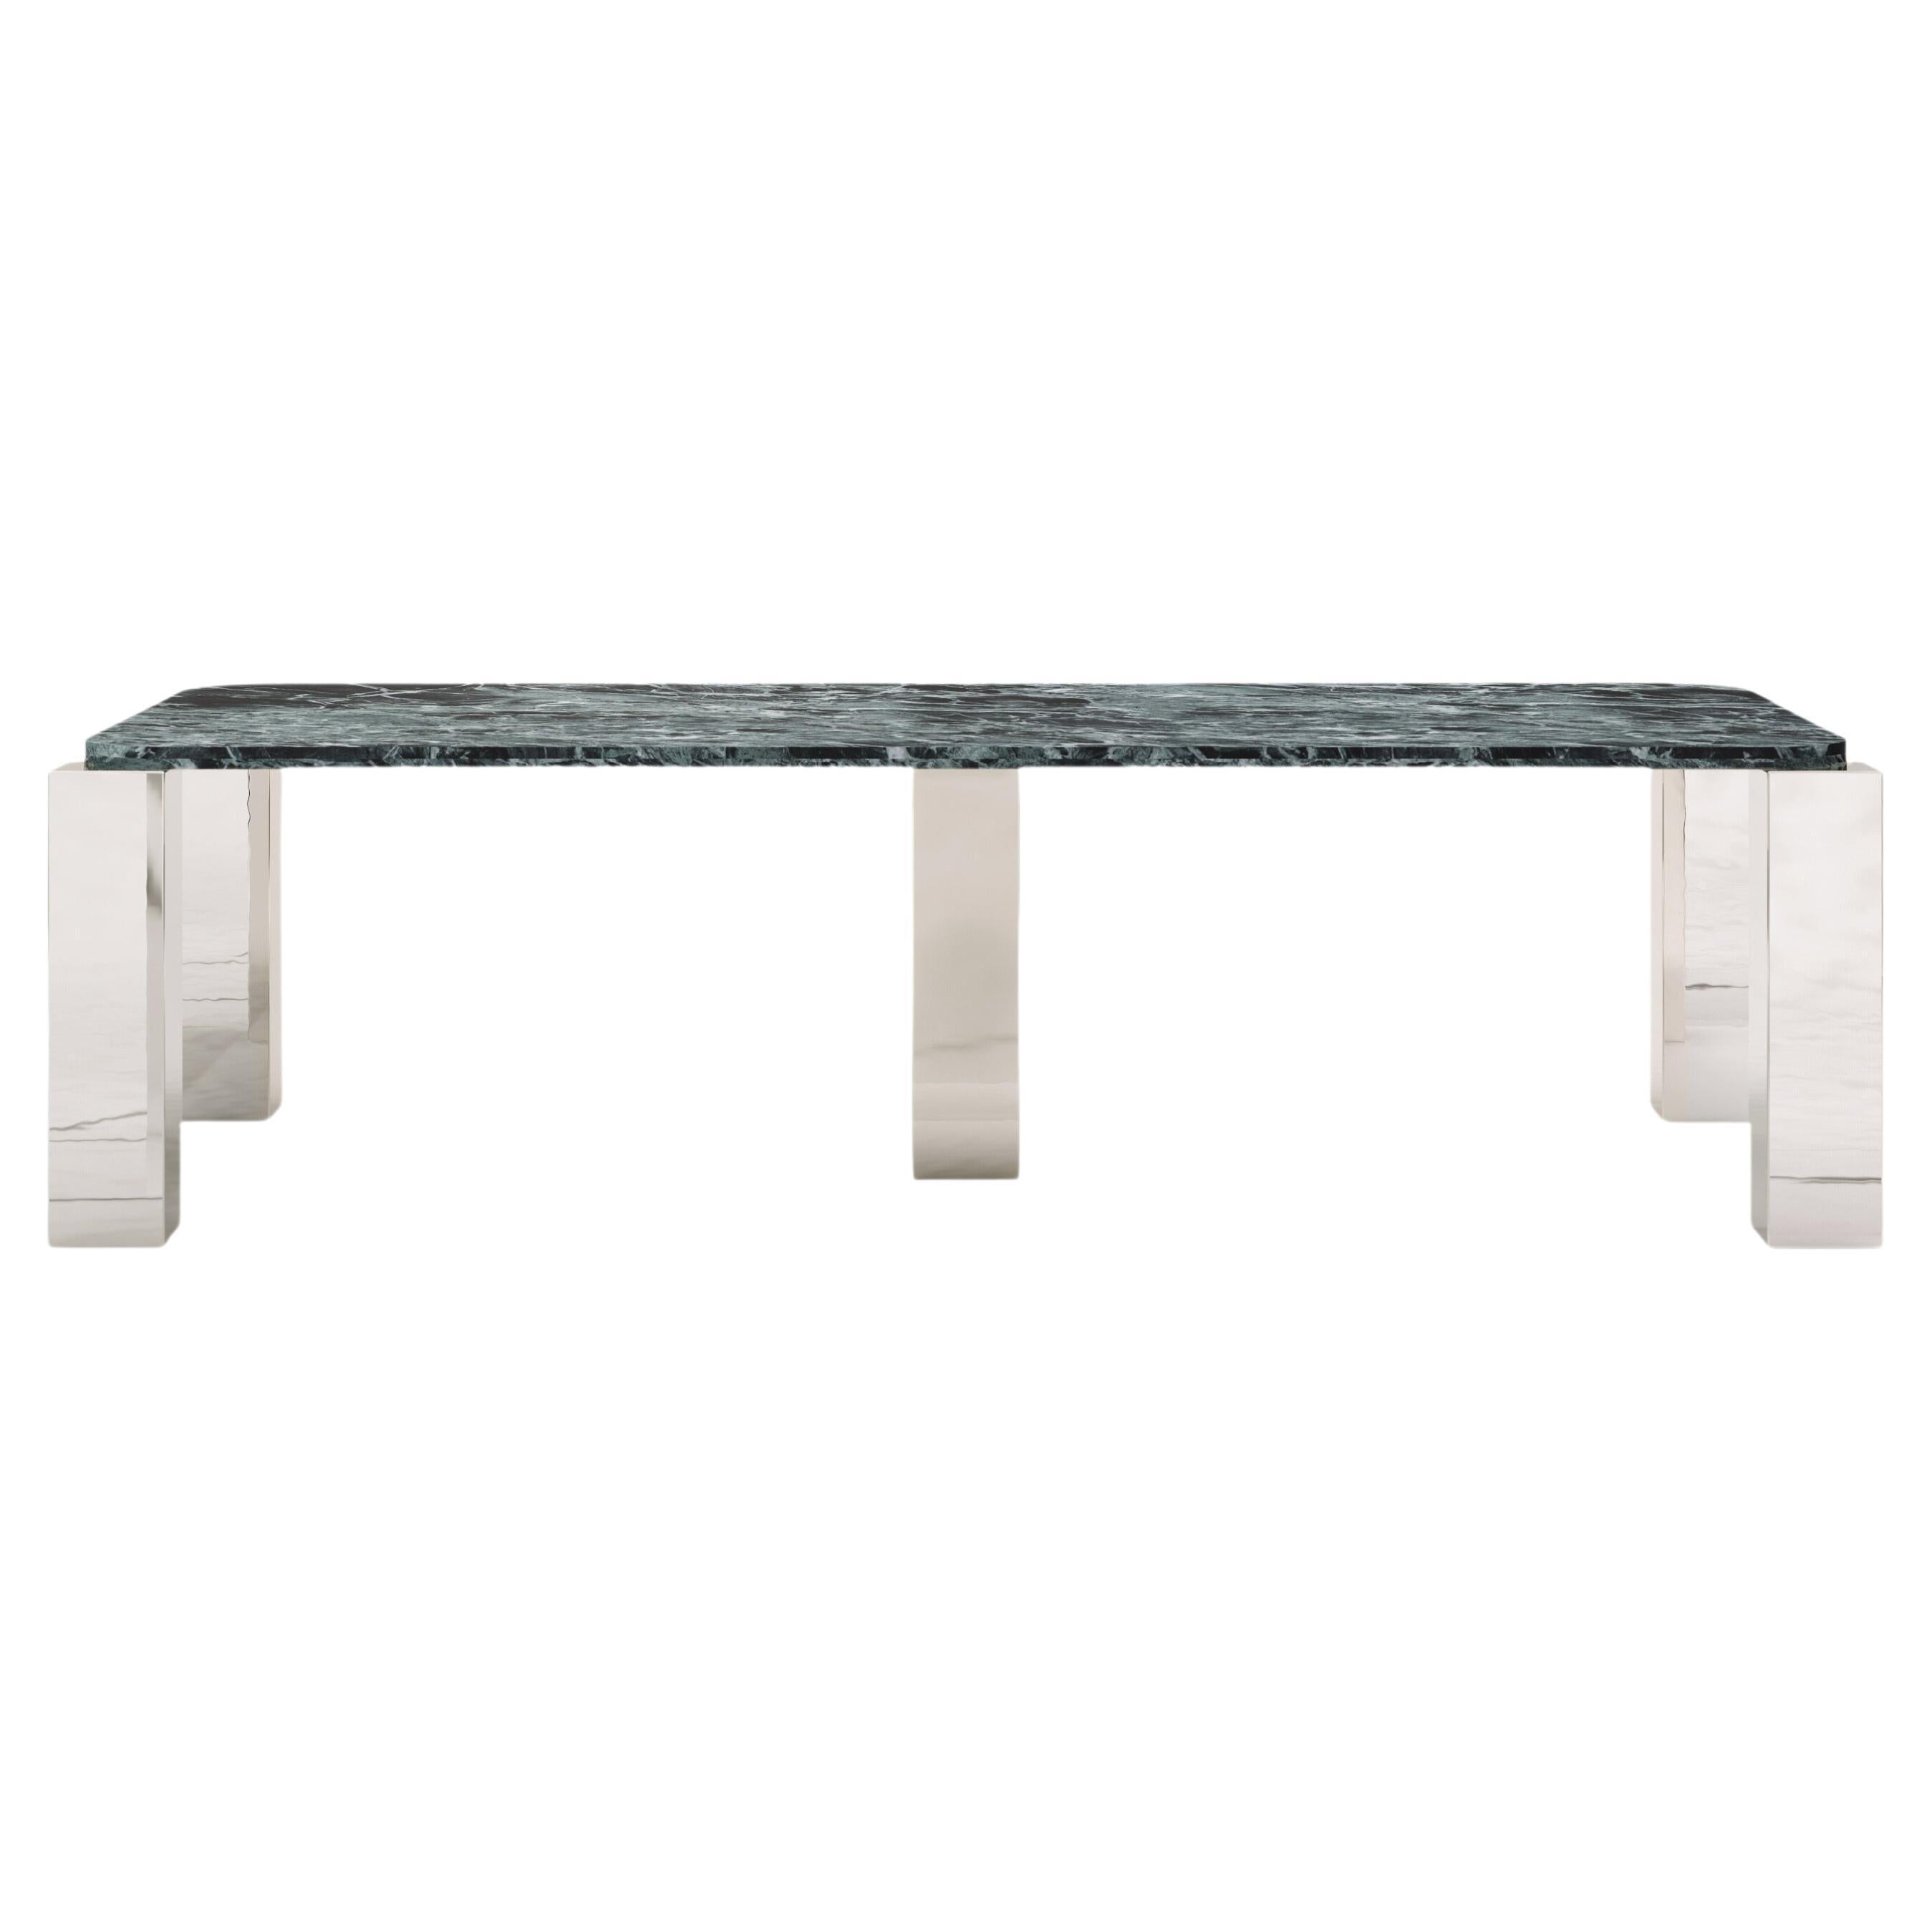 FORM(LA) Cubo Rectangle Dining Table 120”L x 50”W x 30”H Verde Marble & Chrome For Sale